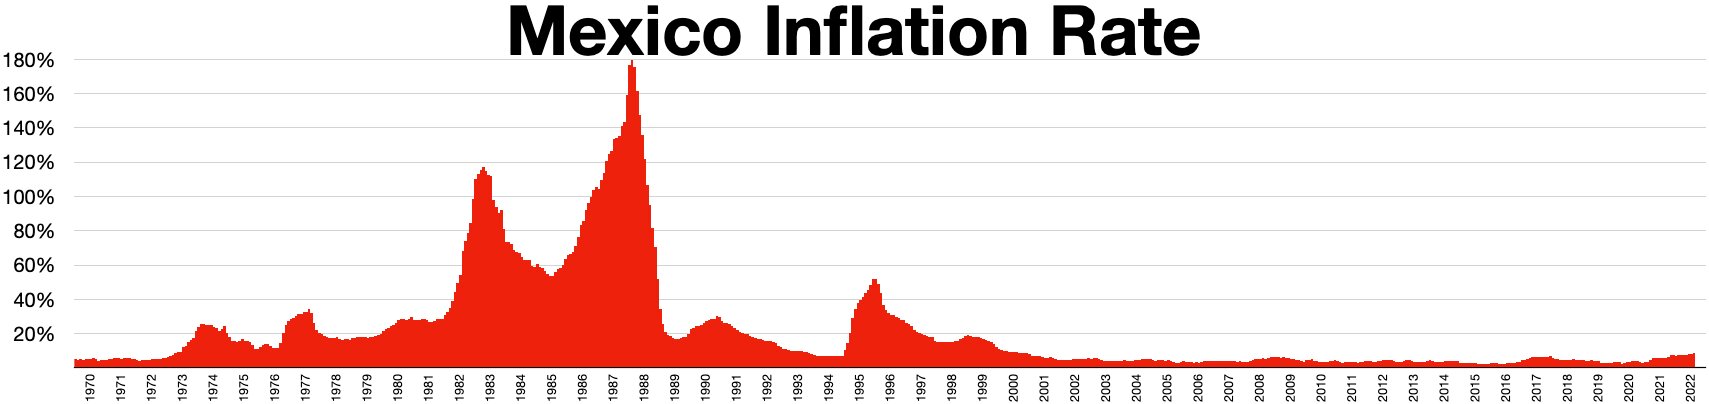 mexico-inflation-rate-1667569234.jpg